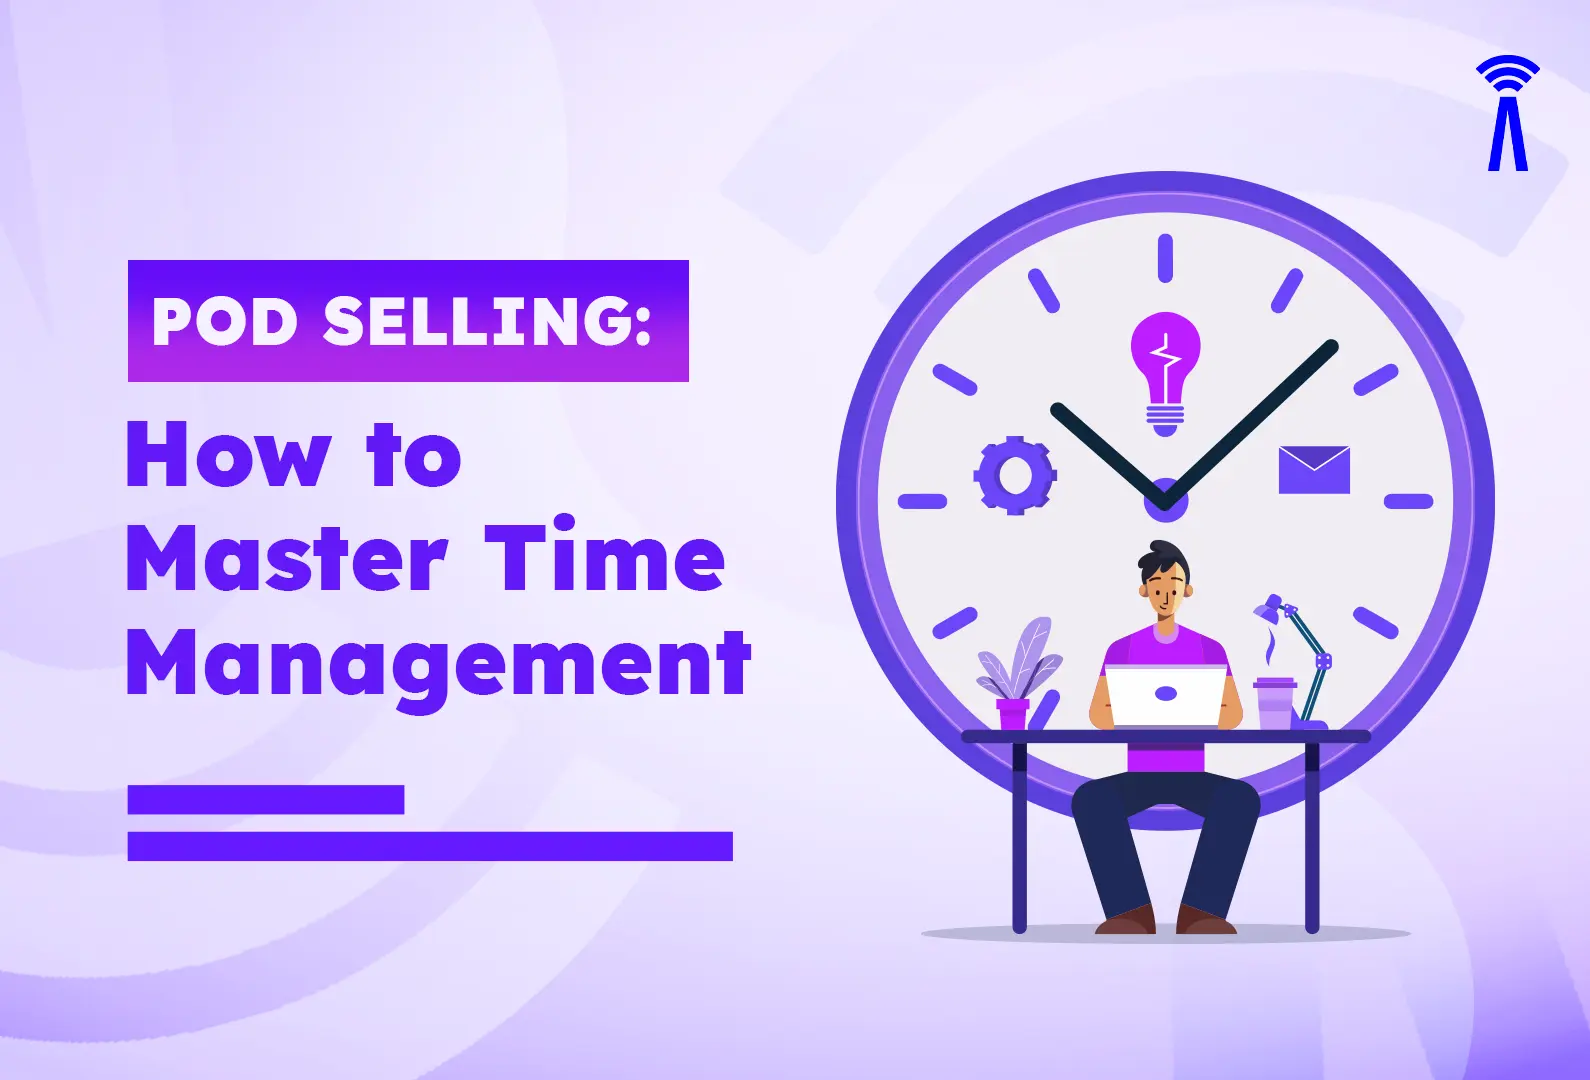 POD Selling How to Master Time Management